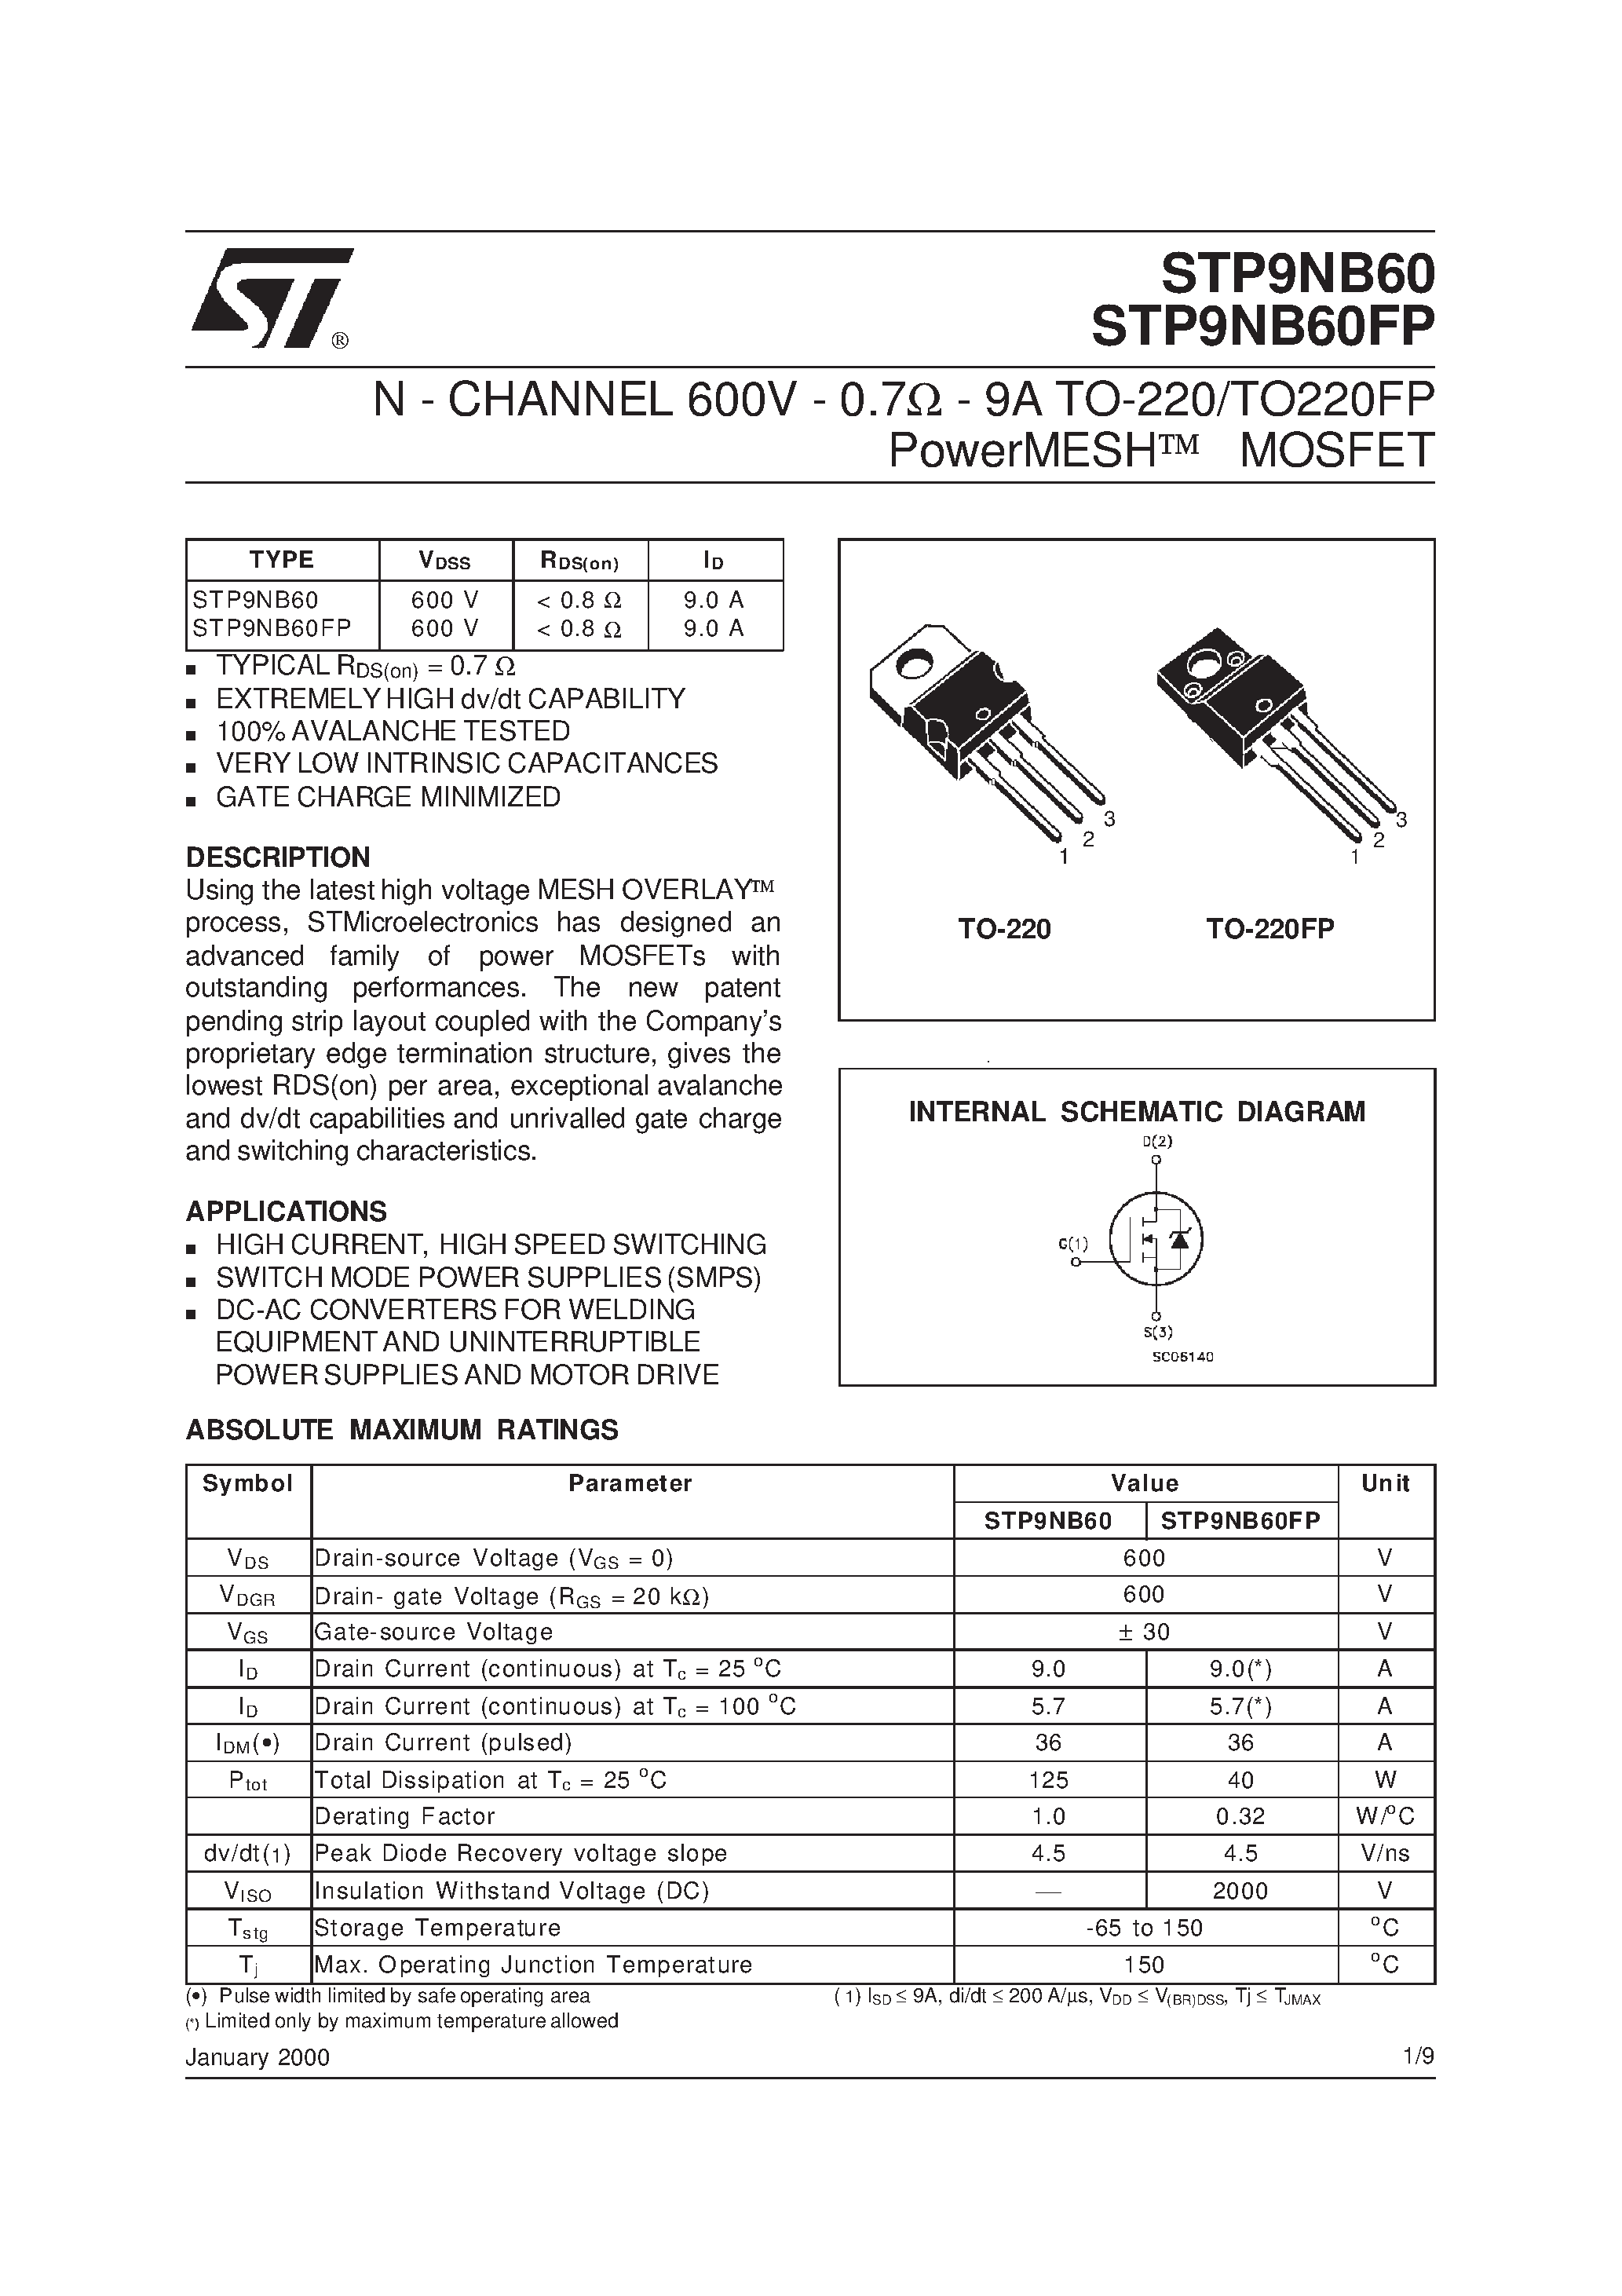 Datasheet P9NB60FP - Search ---> STP9NB60FP page 1